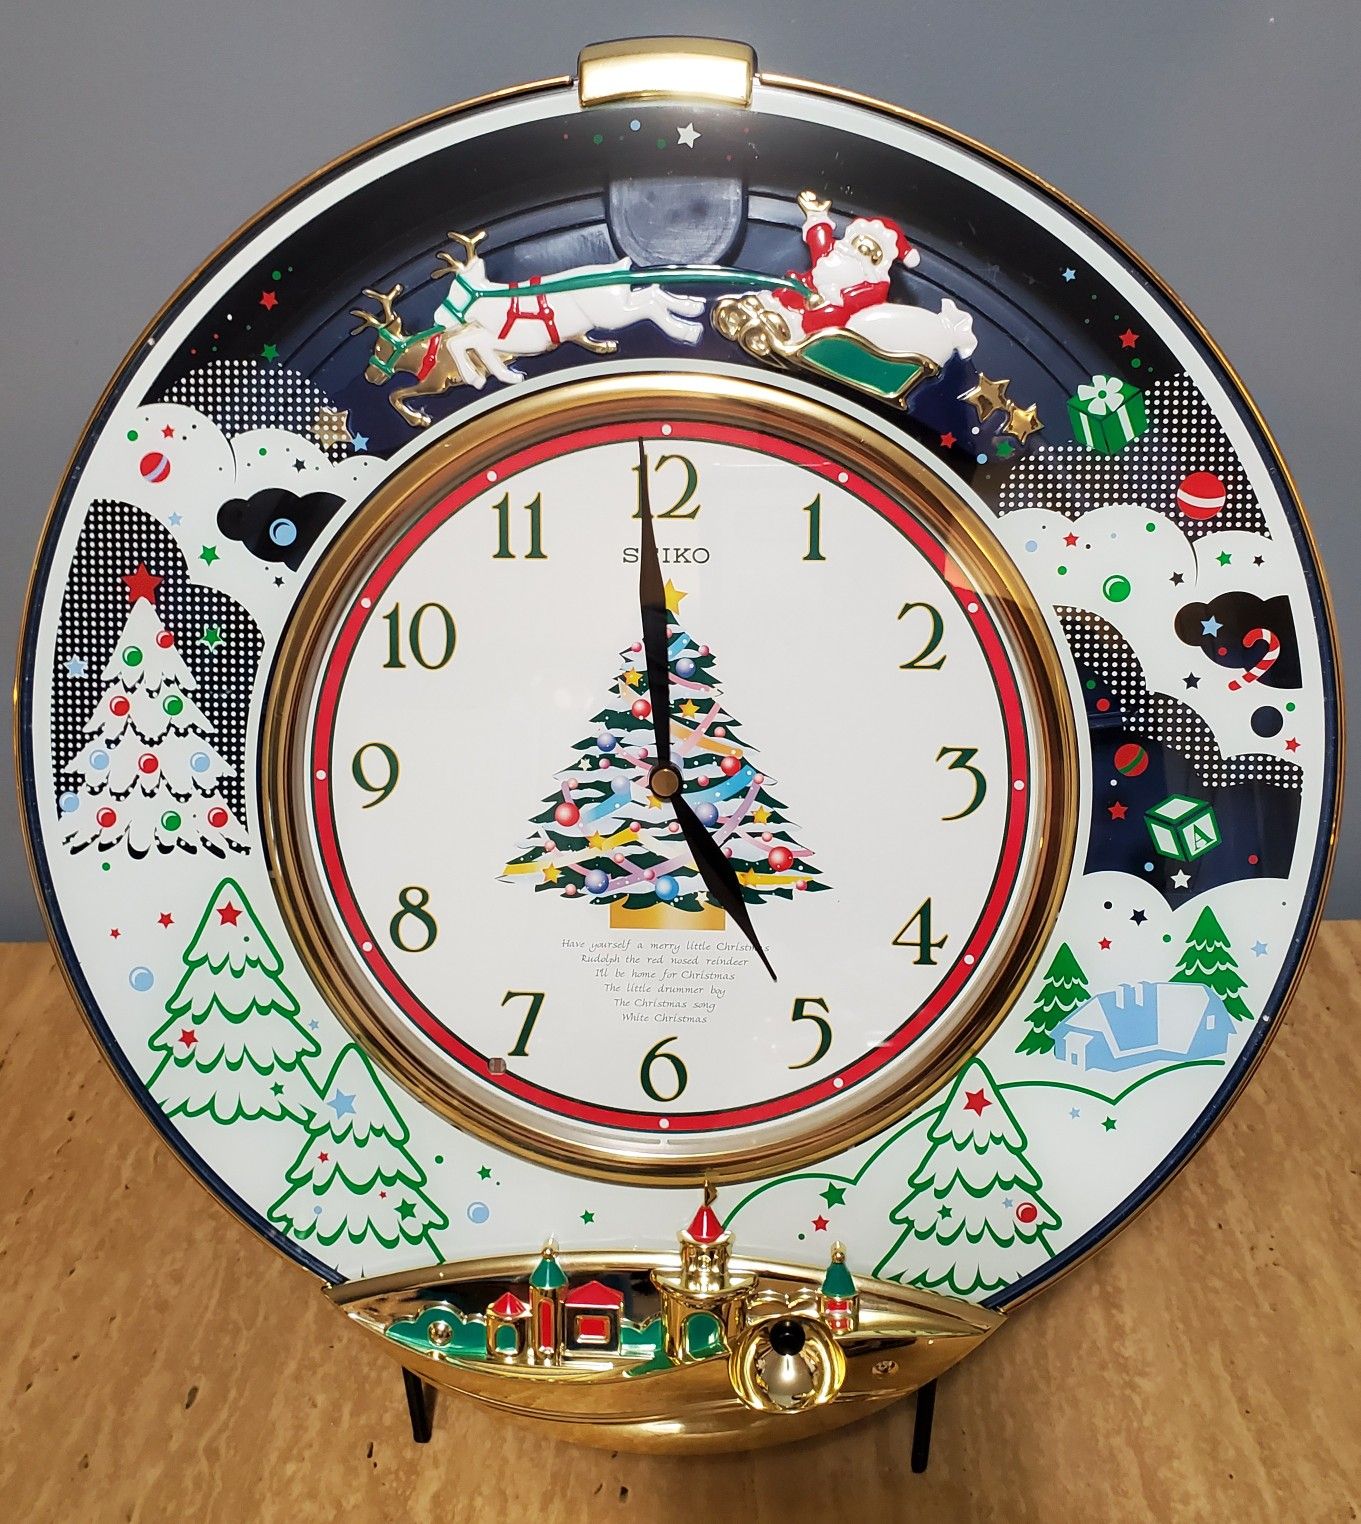 Seiko Melodies in Motion Wall Clock Christmas Edition - Very Rare!